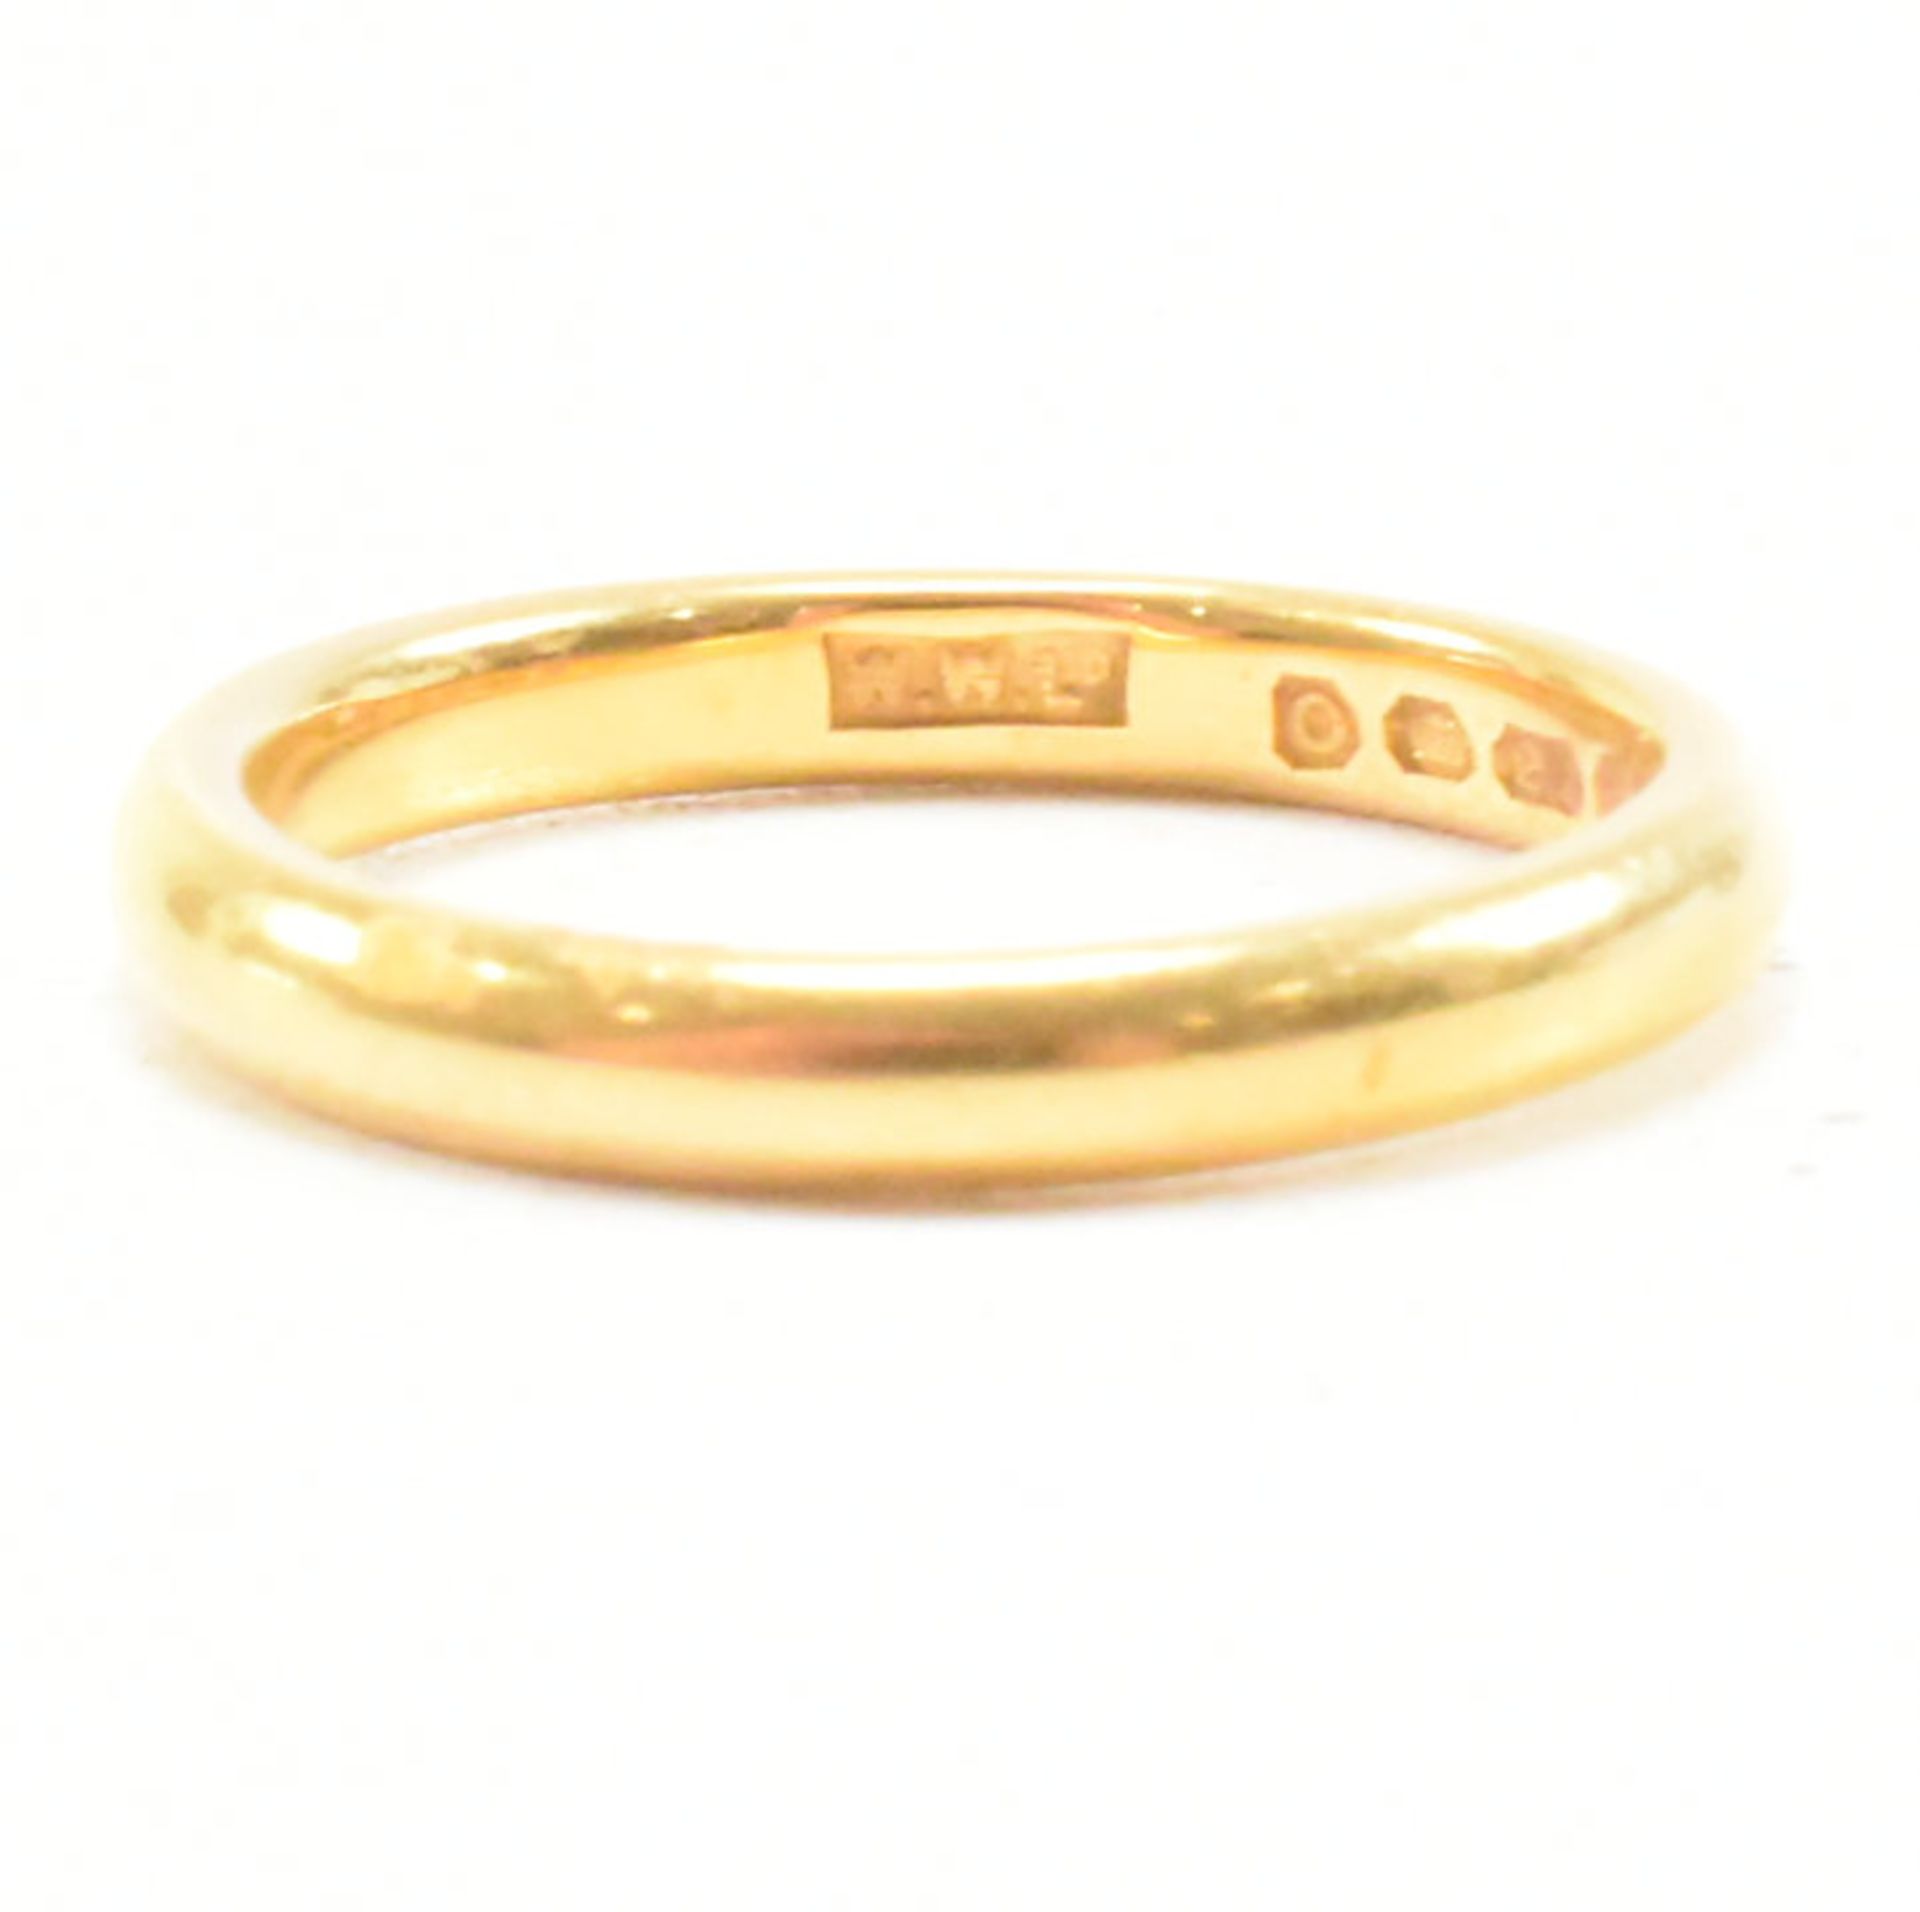 HALLMARKED 22CT GOLD BAND RING - Image 5 of 8